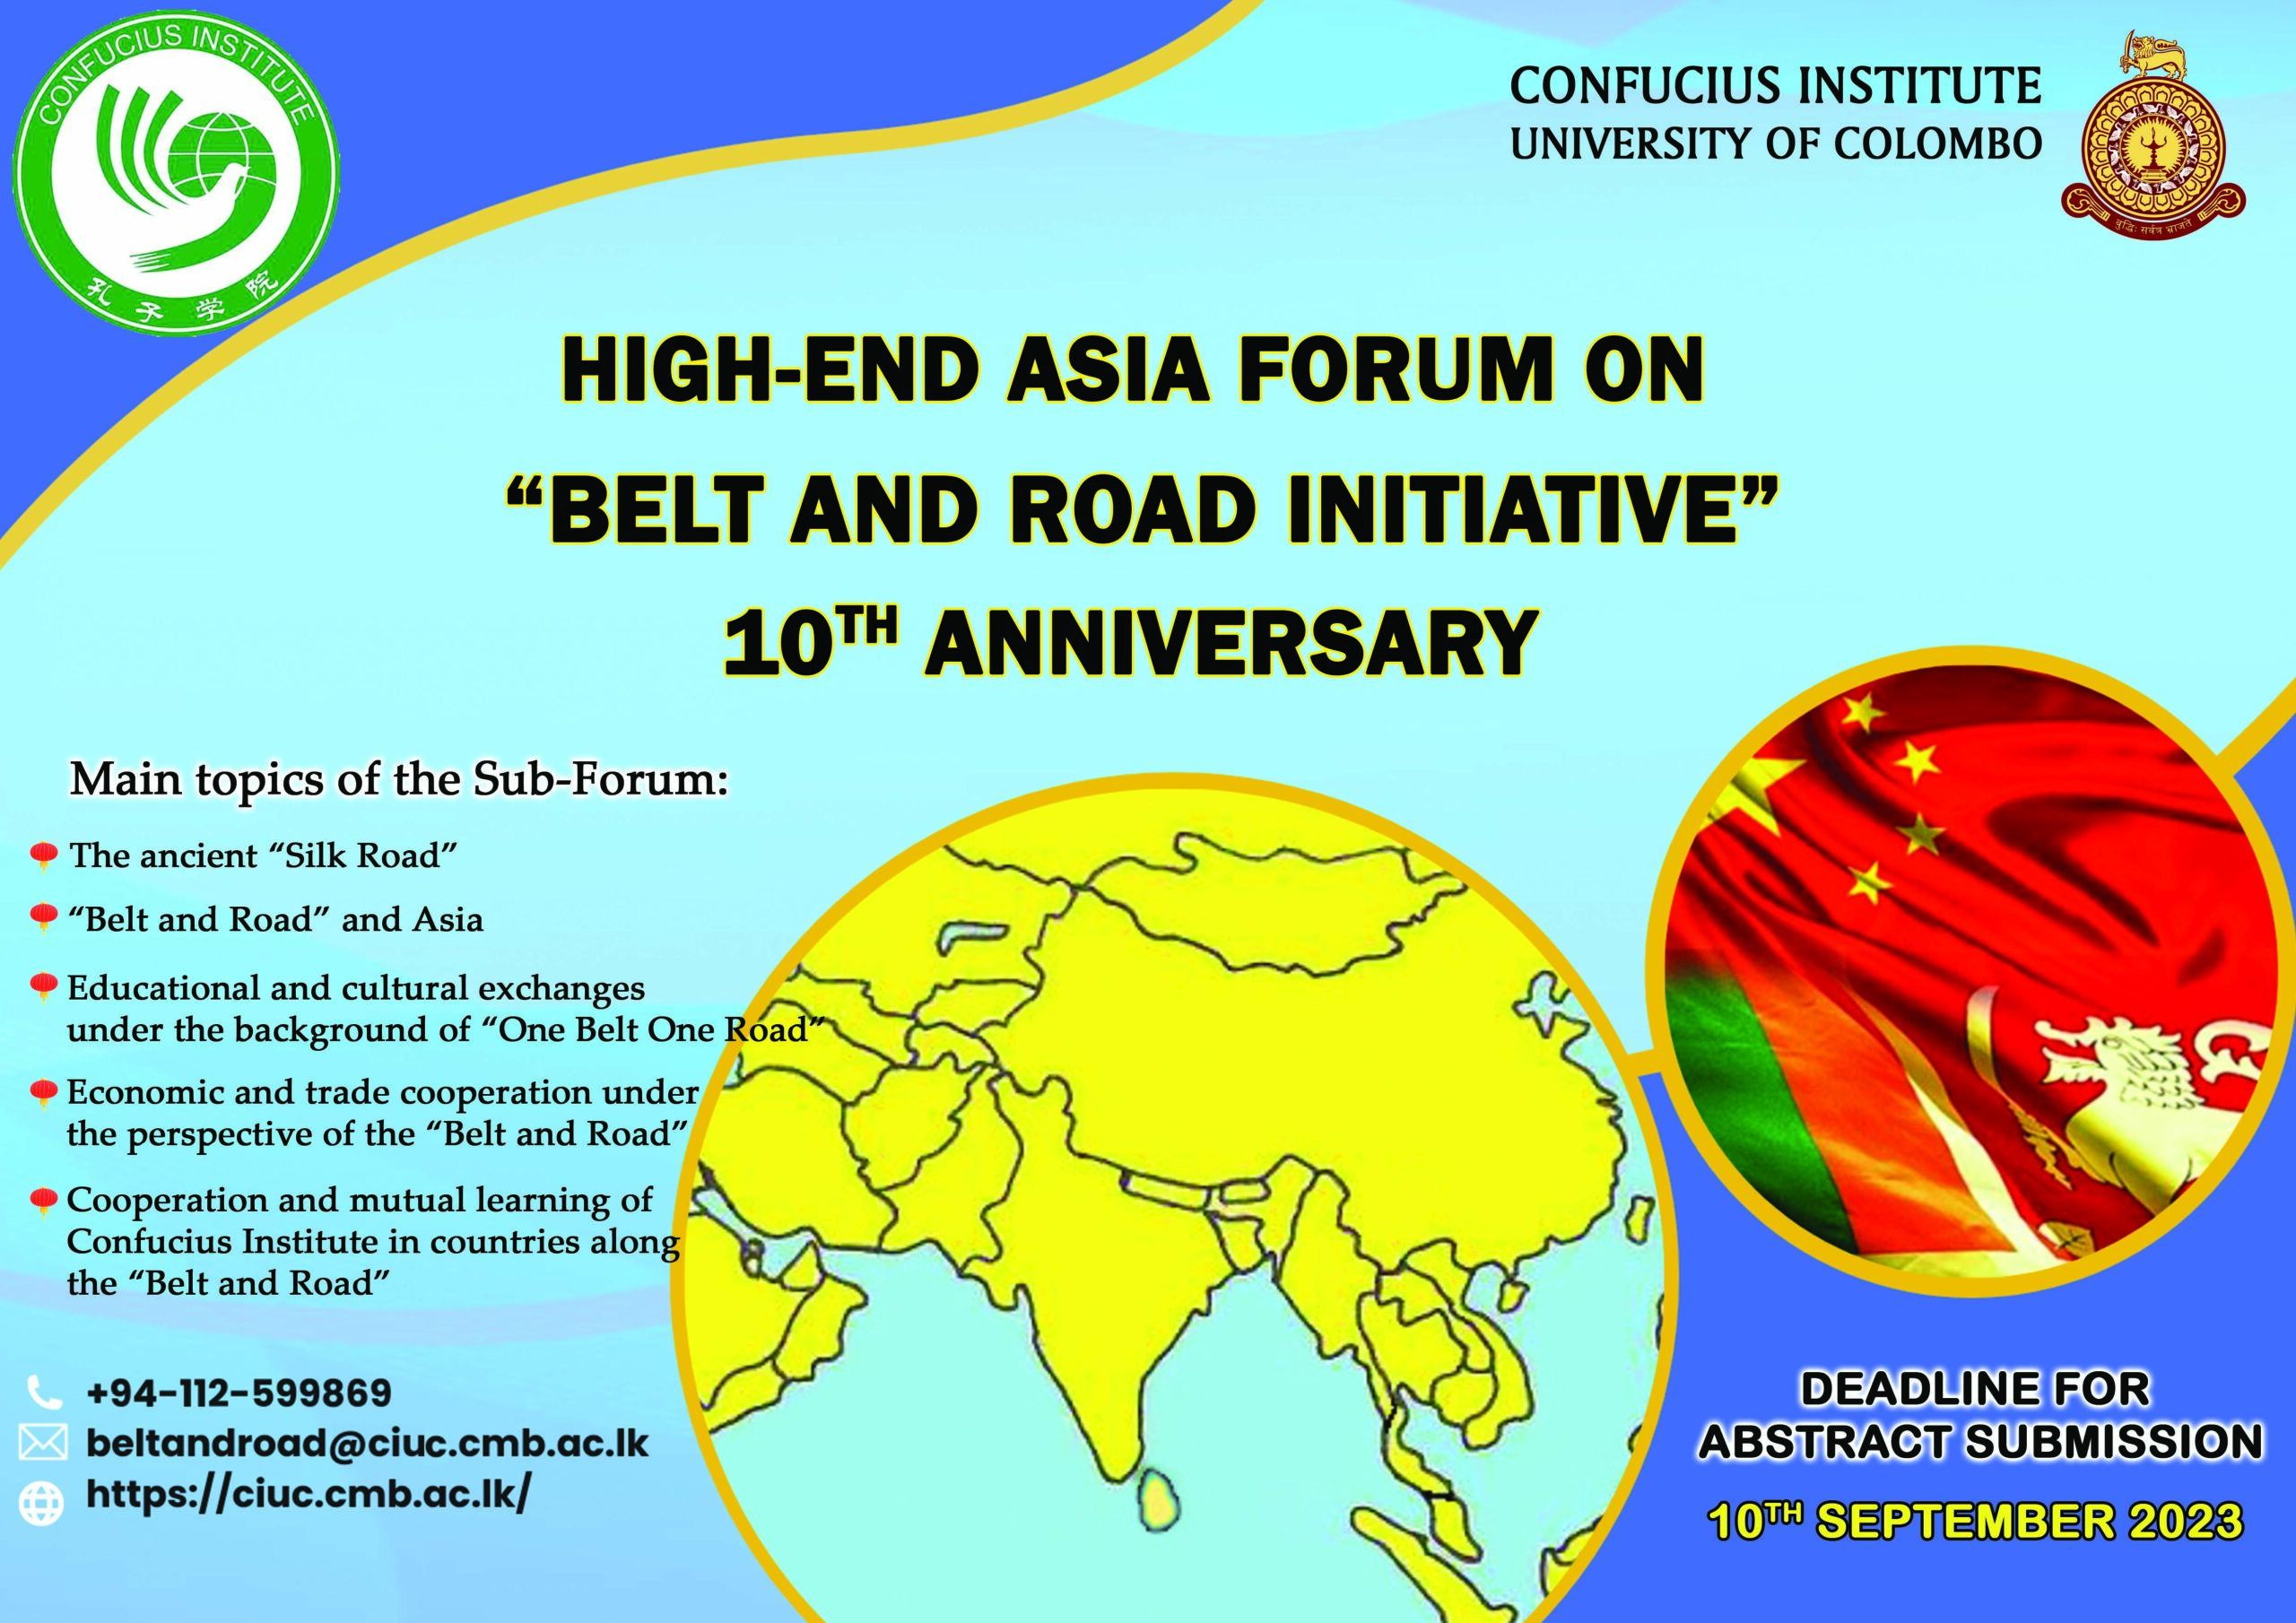 Call for Abstracts for the High-end Asia Forum on “Belt and Road Initiative” 10th Anniversary